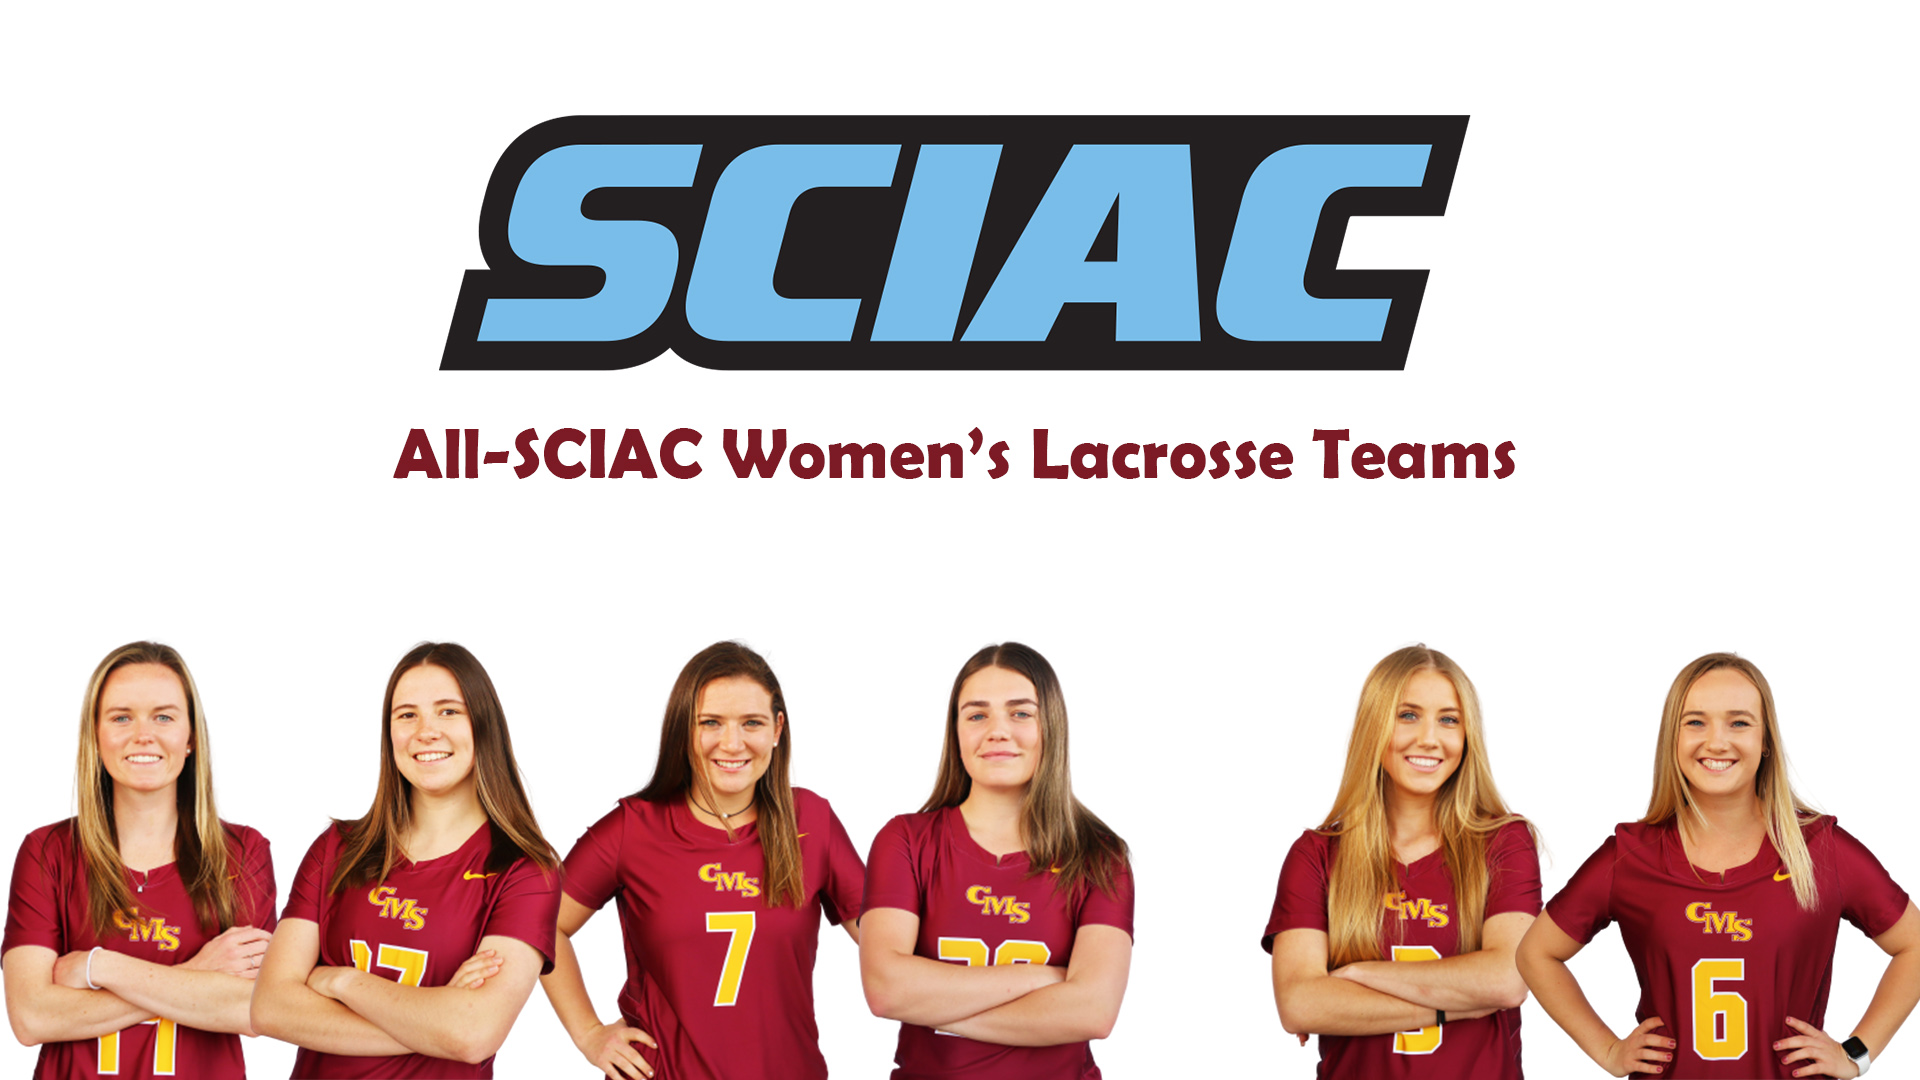 Posed photos of the six award winners with the SCIAC logo